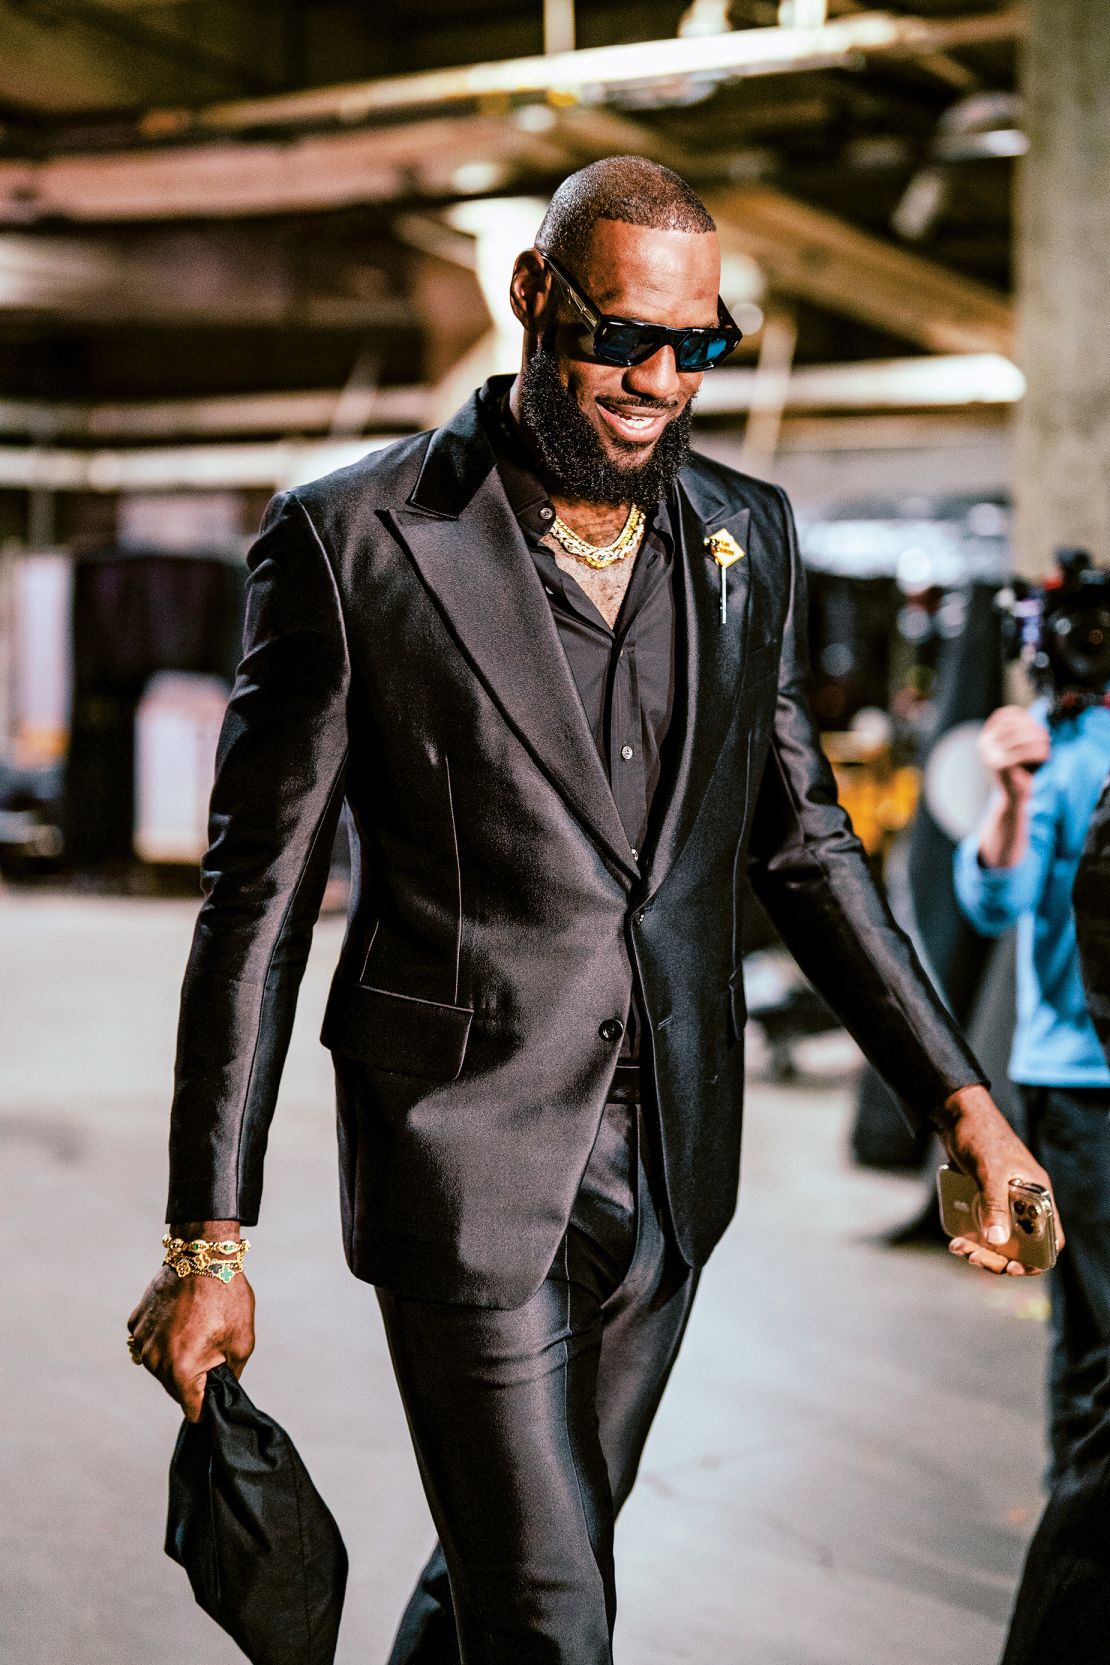 Pictured above, a sharply suited LeBron James arrives for a Los Angeles Lakers game against the Oklahoma City Thunder on February 7, 2023.